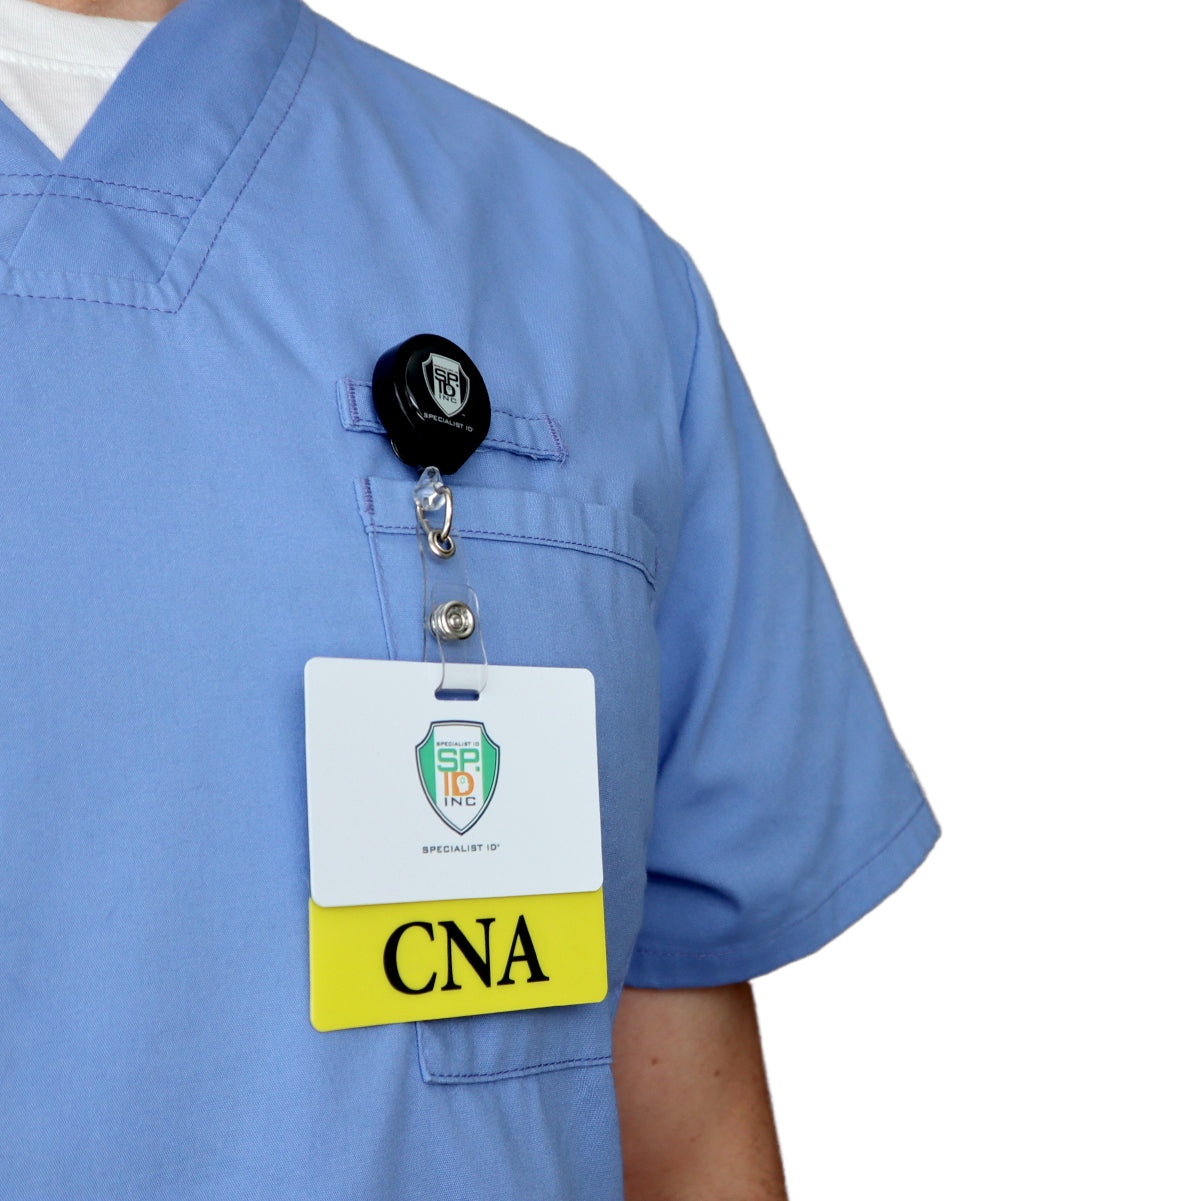 Close-up of a person wearing blue scrubs with a badge holder showing a white card labeled "SP-10 INC" and a yellow card labeled "CNA," utilizing a Clear CNA Badge Buddy - Horizontal ID Badge Backer for Nursing Assistant - Double Sided Print for clear visibility.